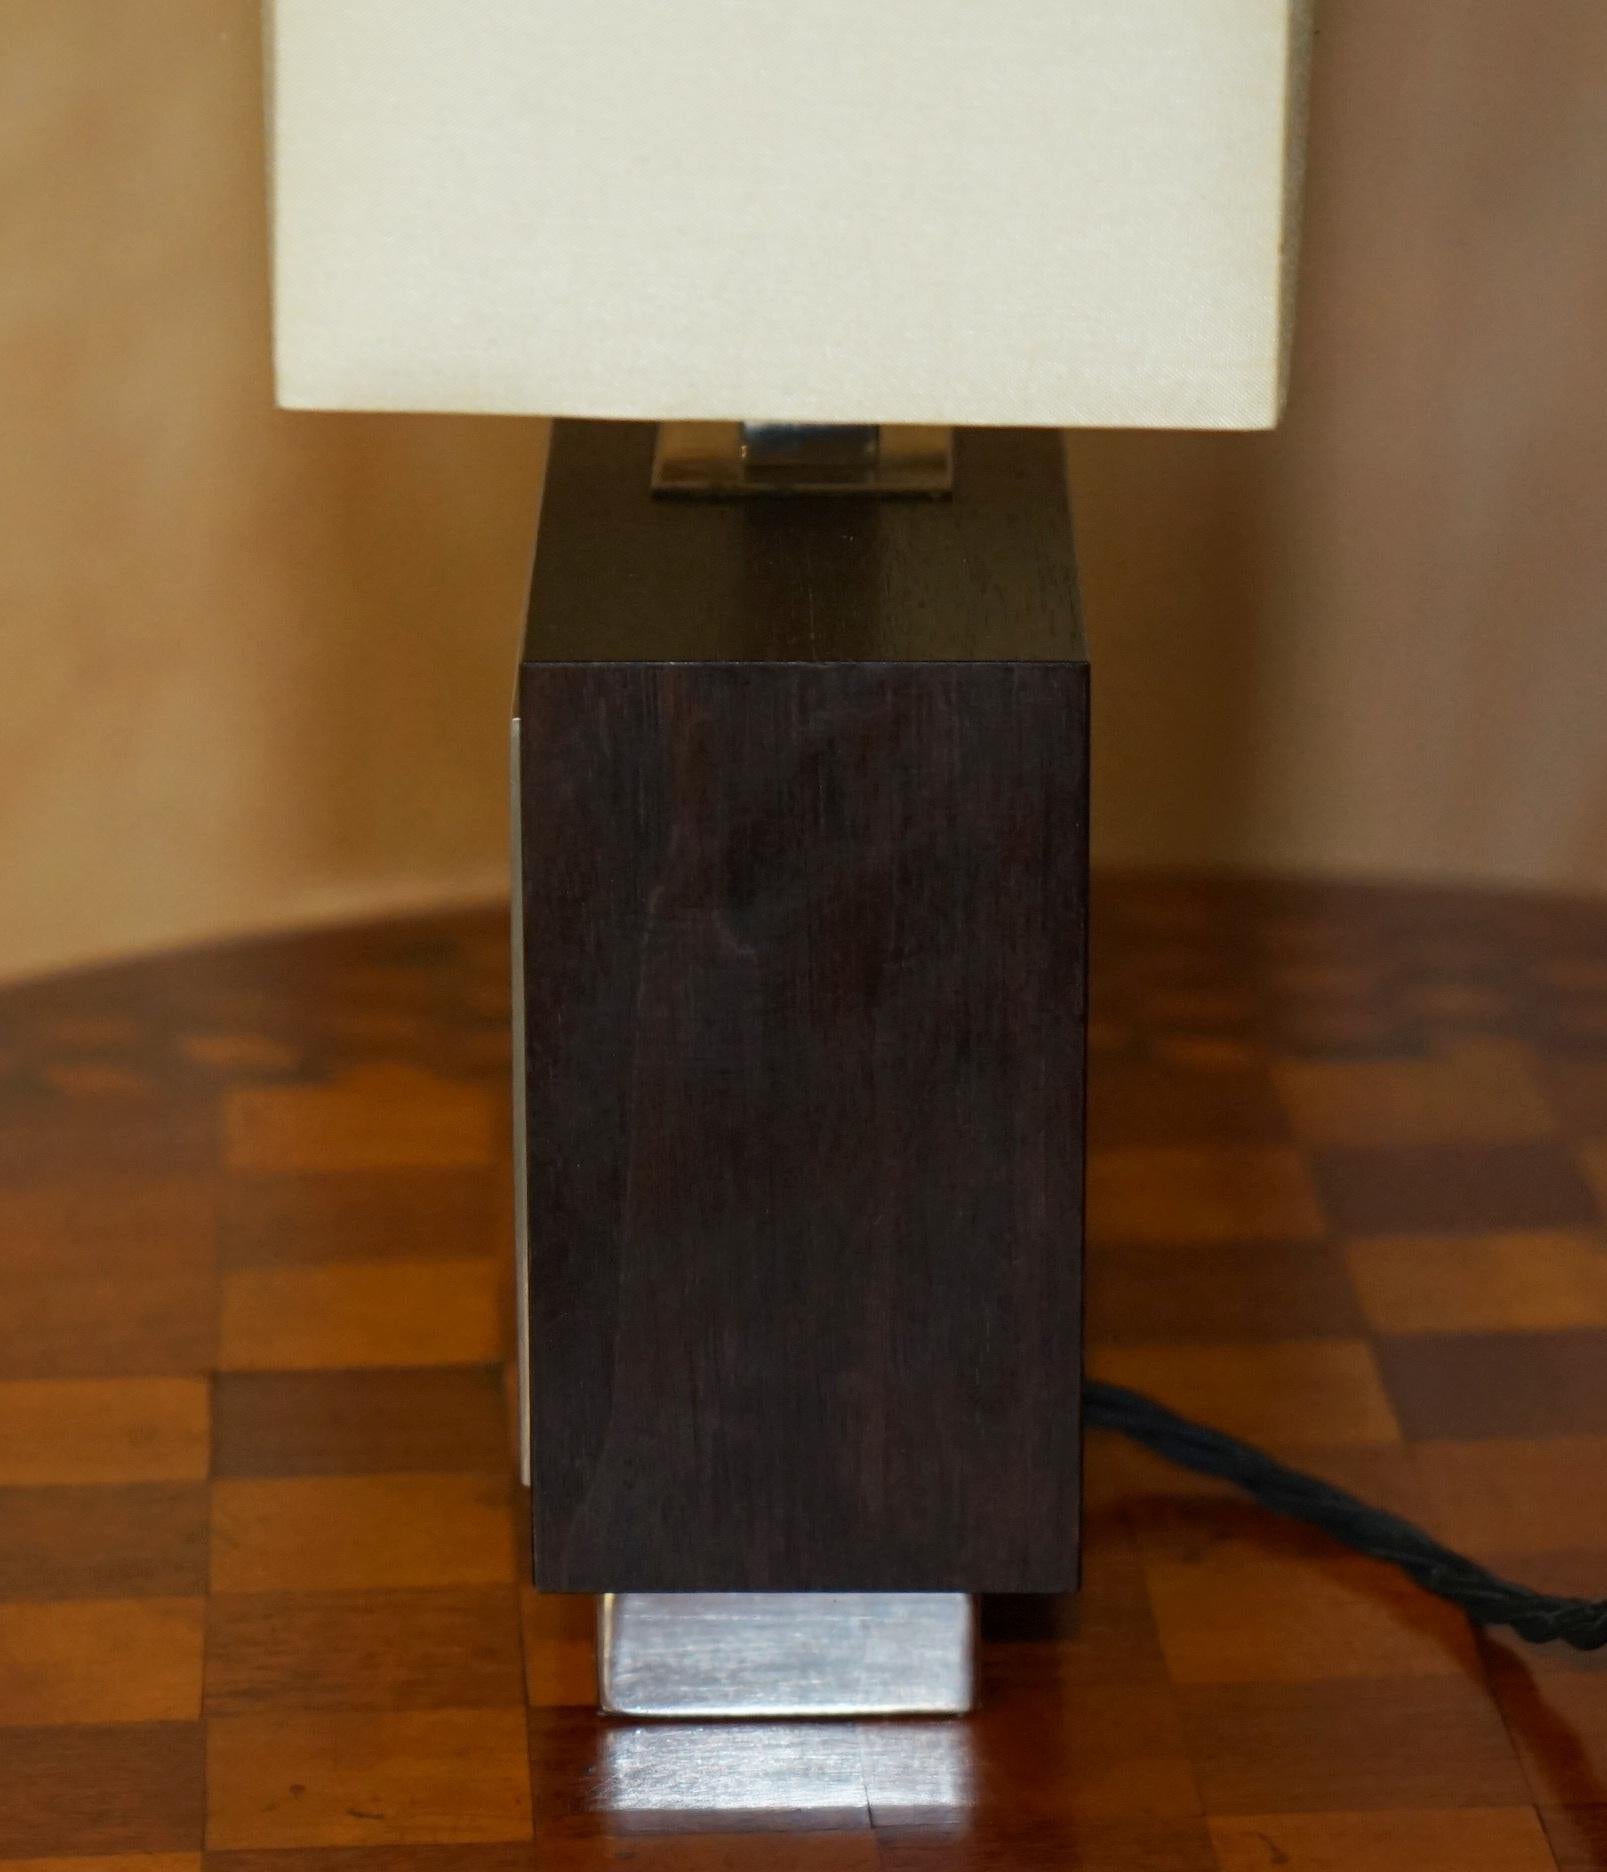 EXQUISITE PAIR OF DAVID LINLEY CHELSEA TABLE LAMPS WITH DIMMER SWITCHEs For Sale 6